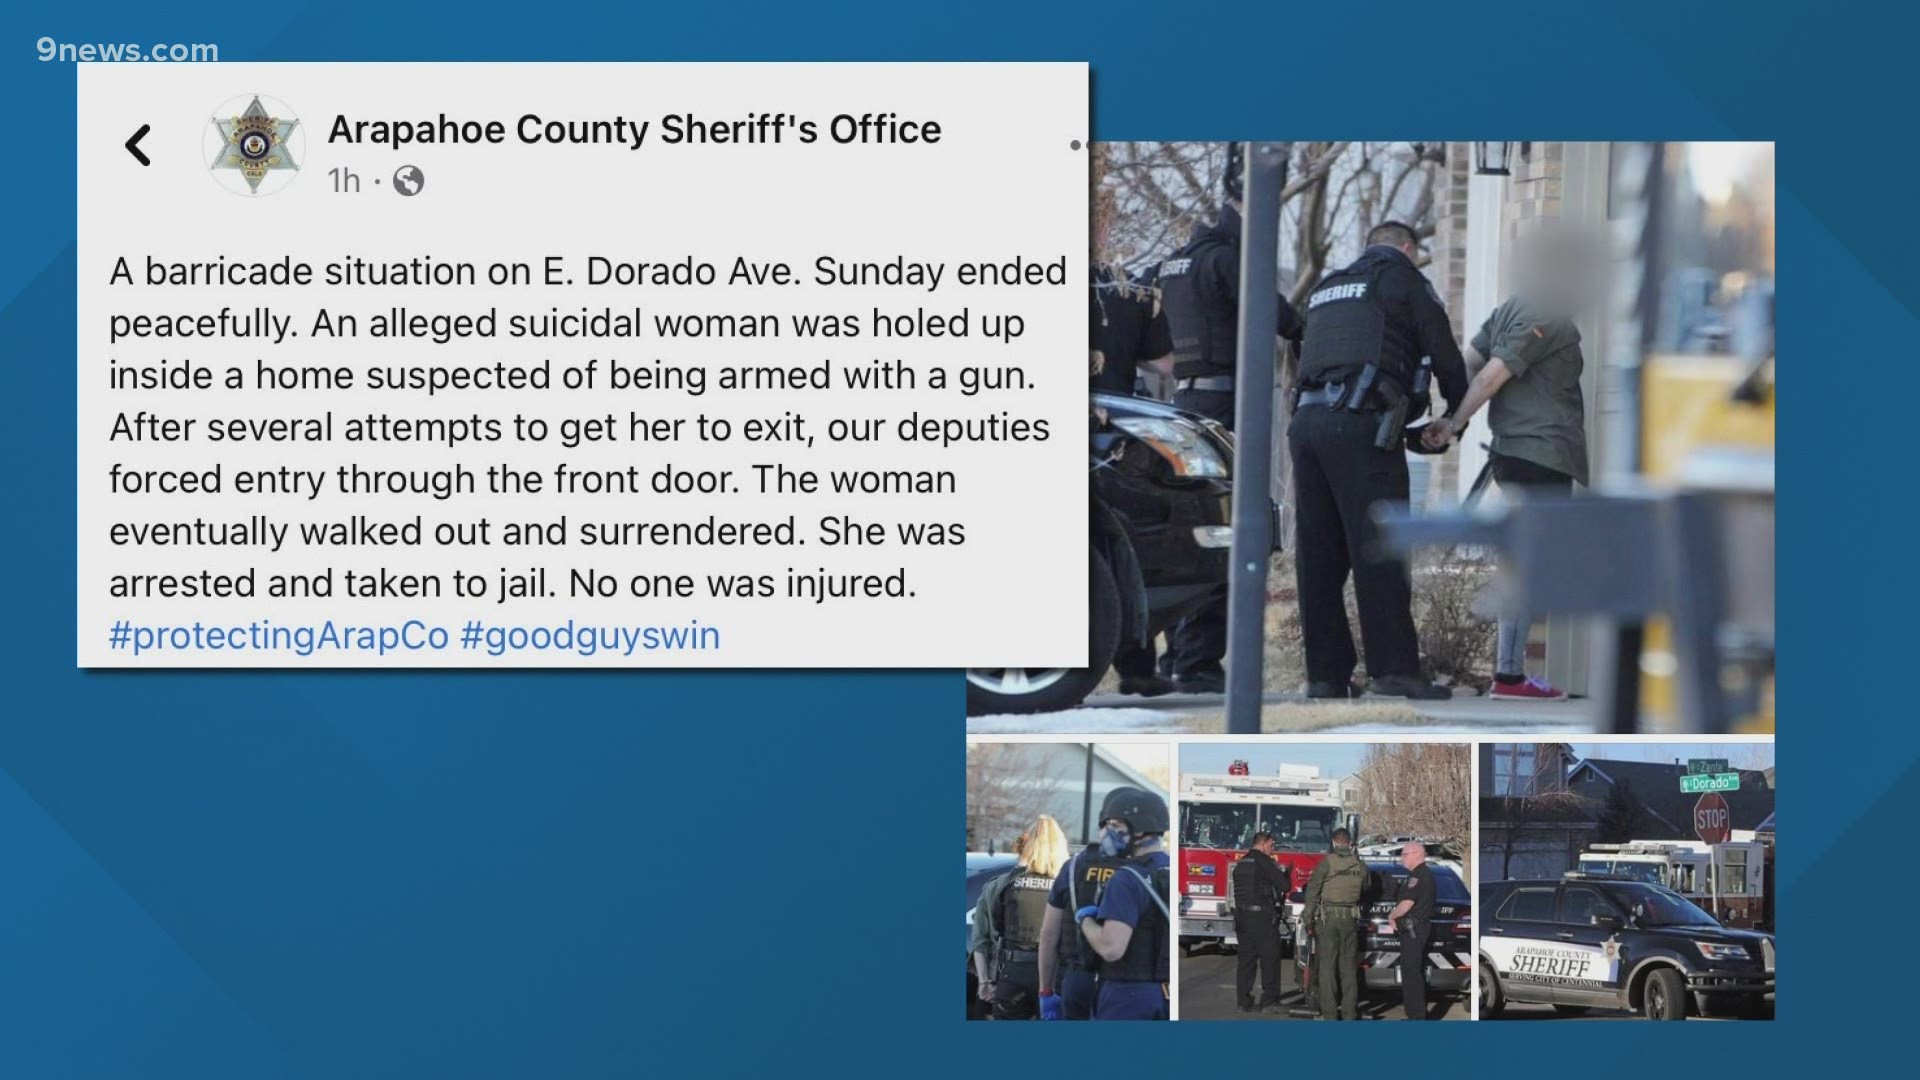 The Arapahoe County Sheriff's Office used the hashtag "good guys win" in the post, which a spokesperson for the department said was a poor choice.